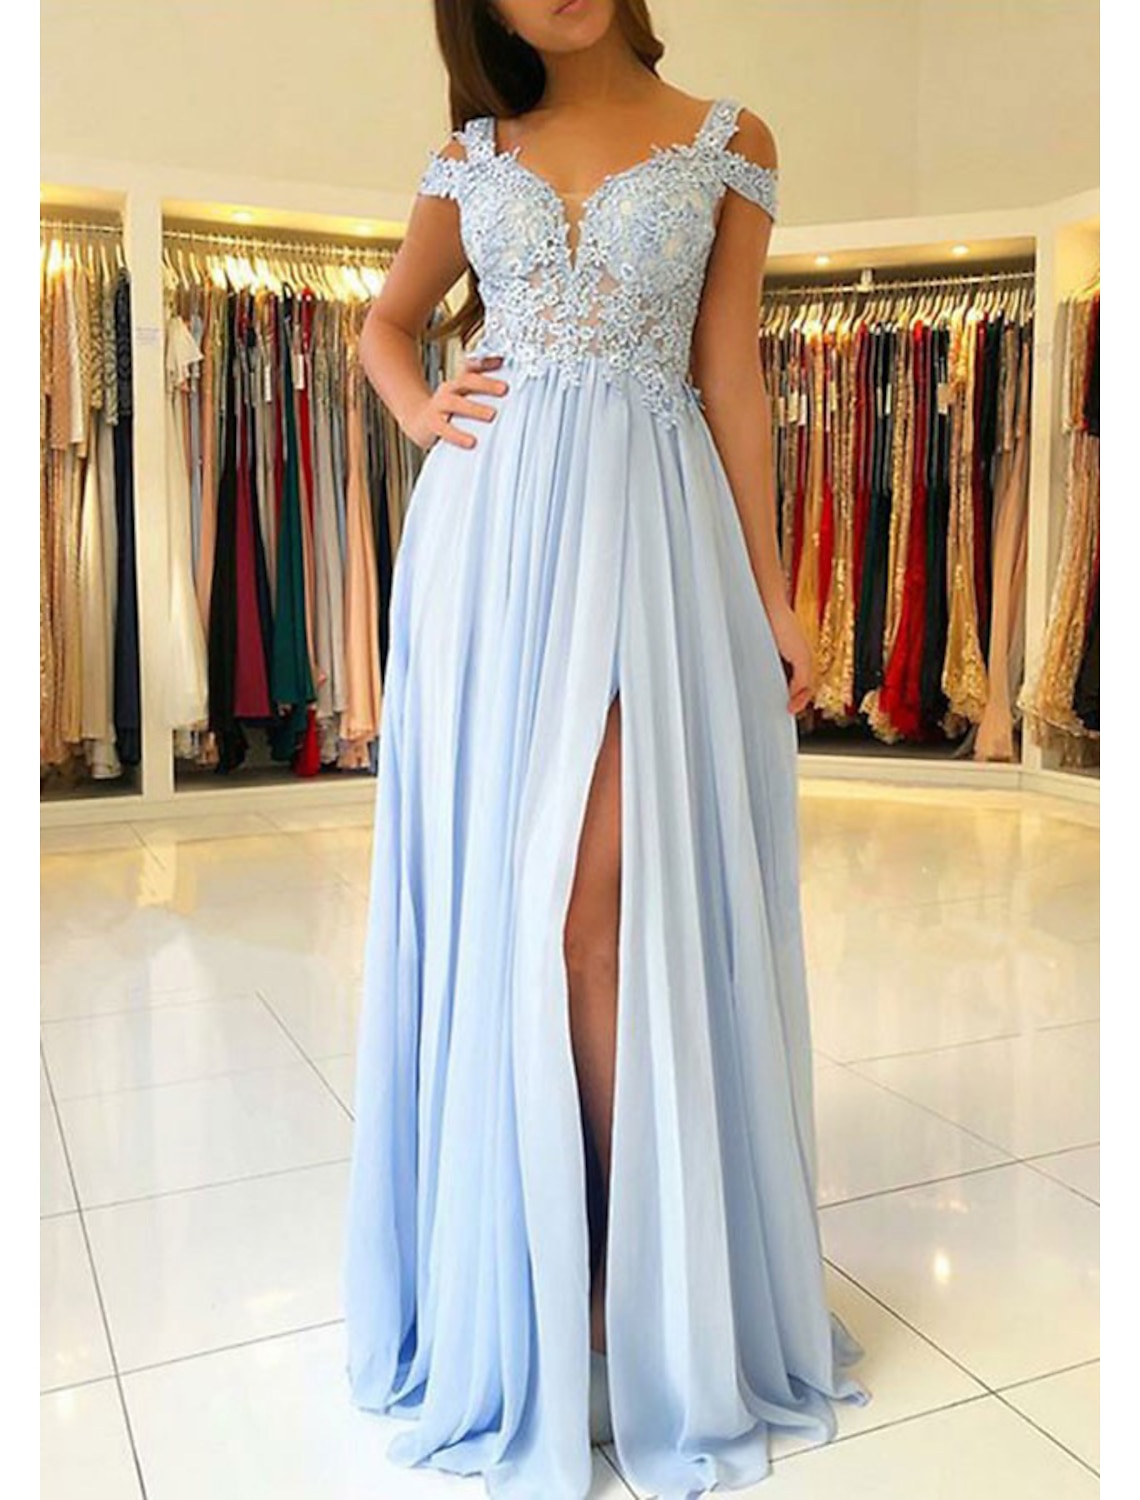 HOT Stock New Long Chiffon Bridesmaid Prom Dresses Formal Evening Party Gown6-20 